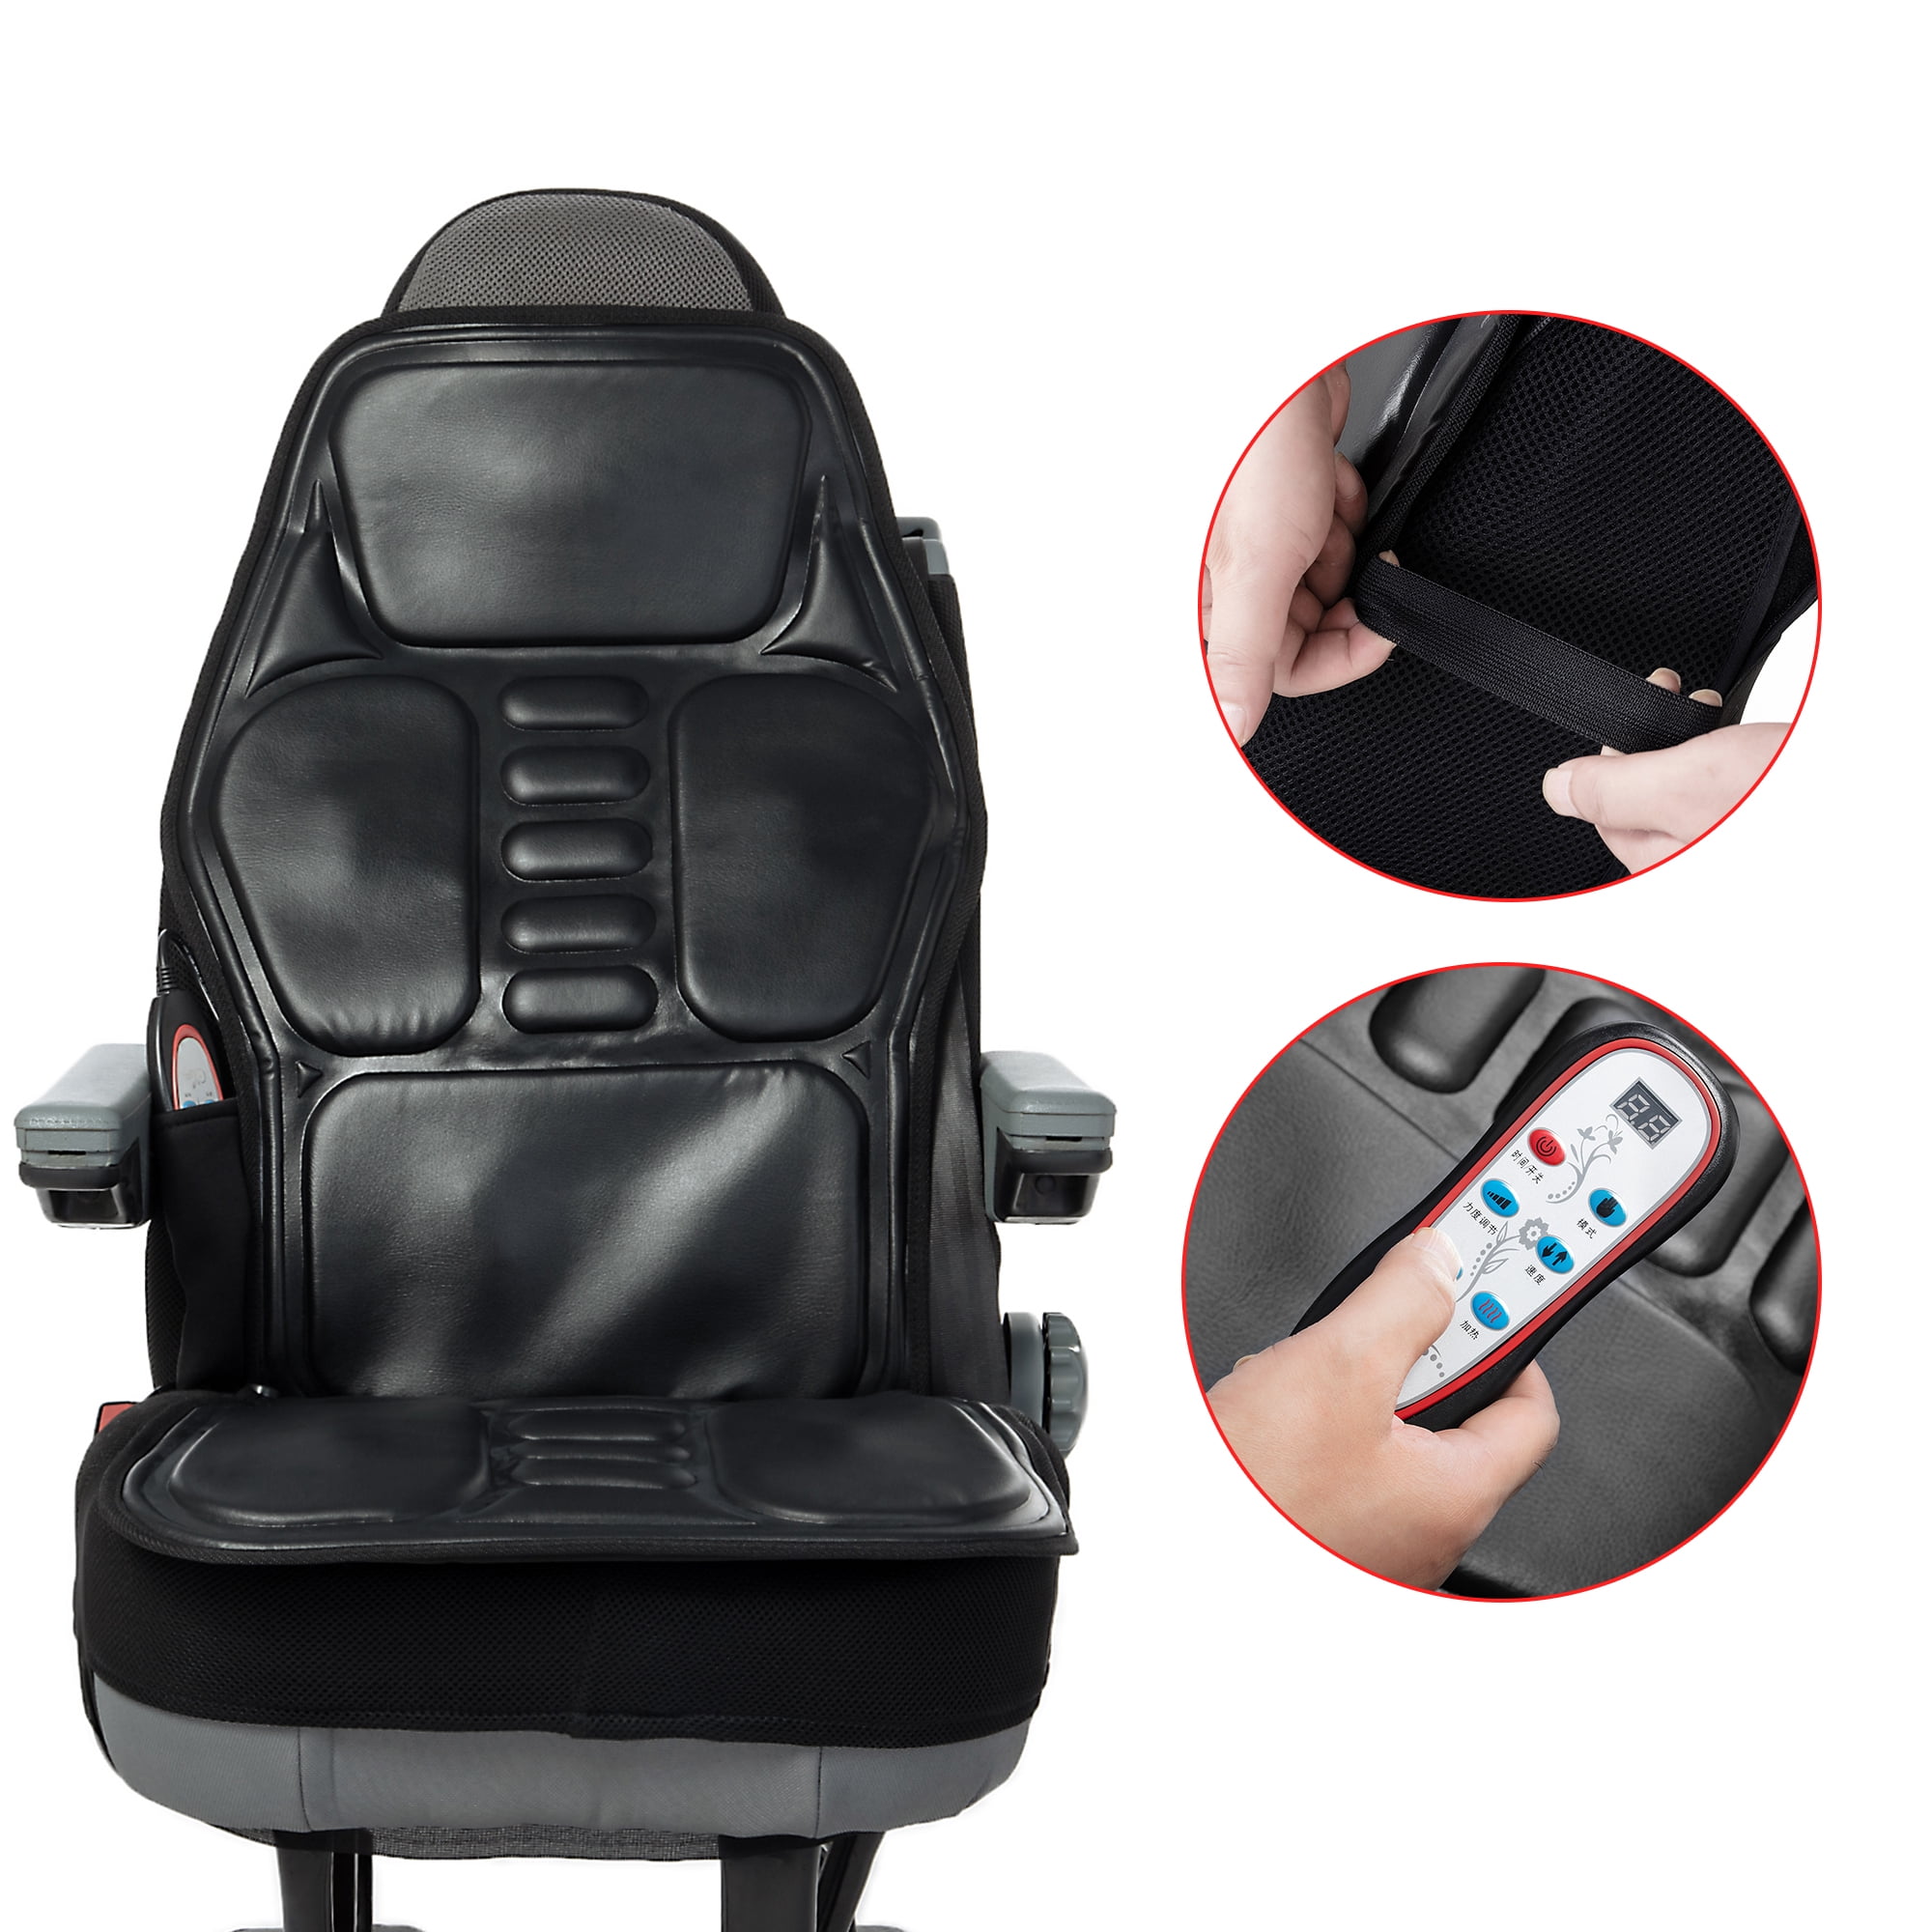 CARSHION Massage Chair Pad,Seat Cushion with 5 Vibration Motors & 2 Heat  Levels Lumber Support, Seat…See more CARSHION Massage Chair Pad,Seat  Cushion